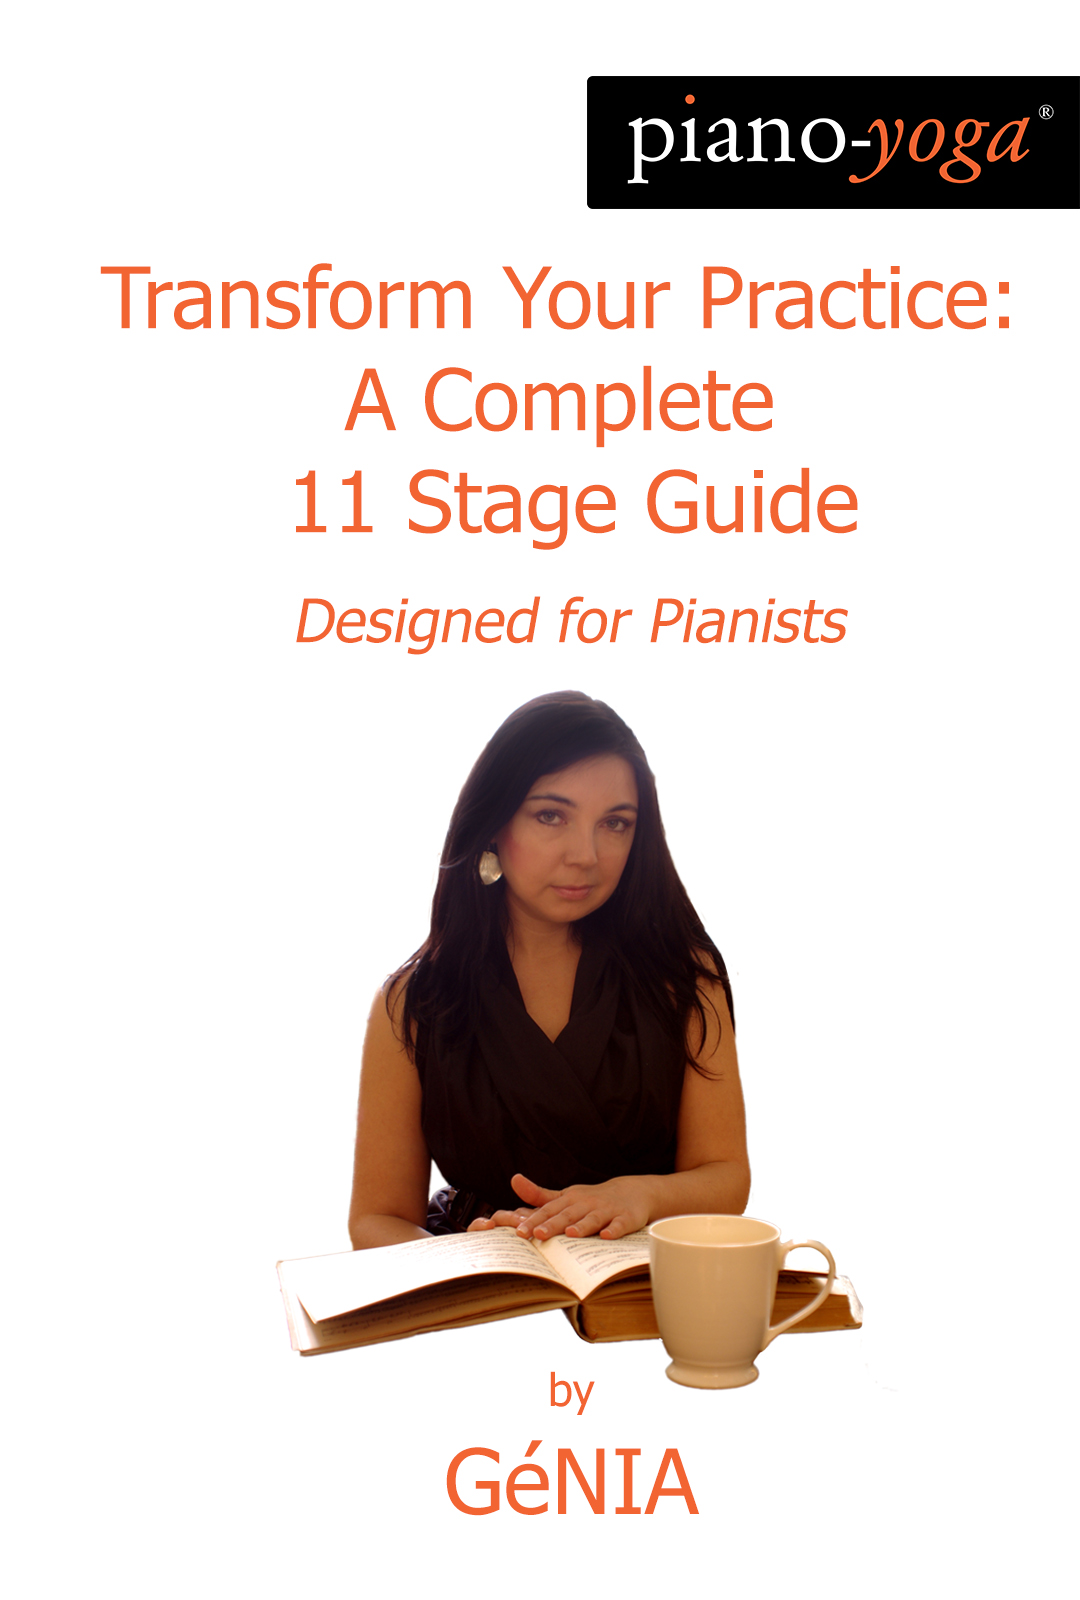 GéNIA launches 'Transform Your Practice: A Complete 11 Stage Guide'